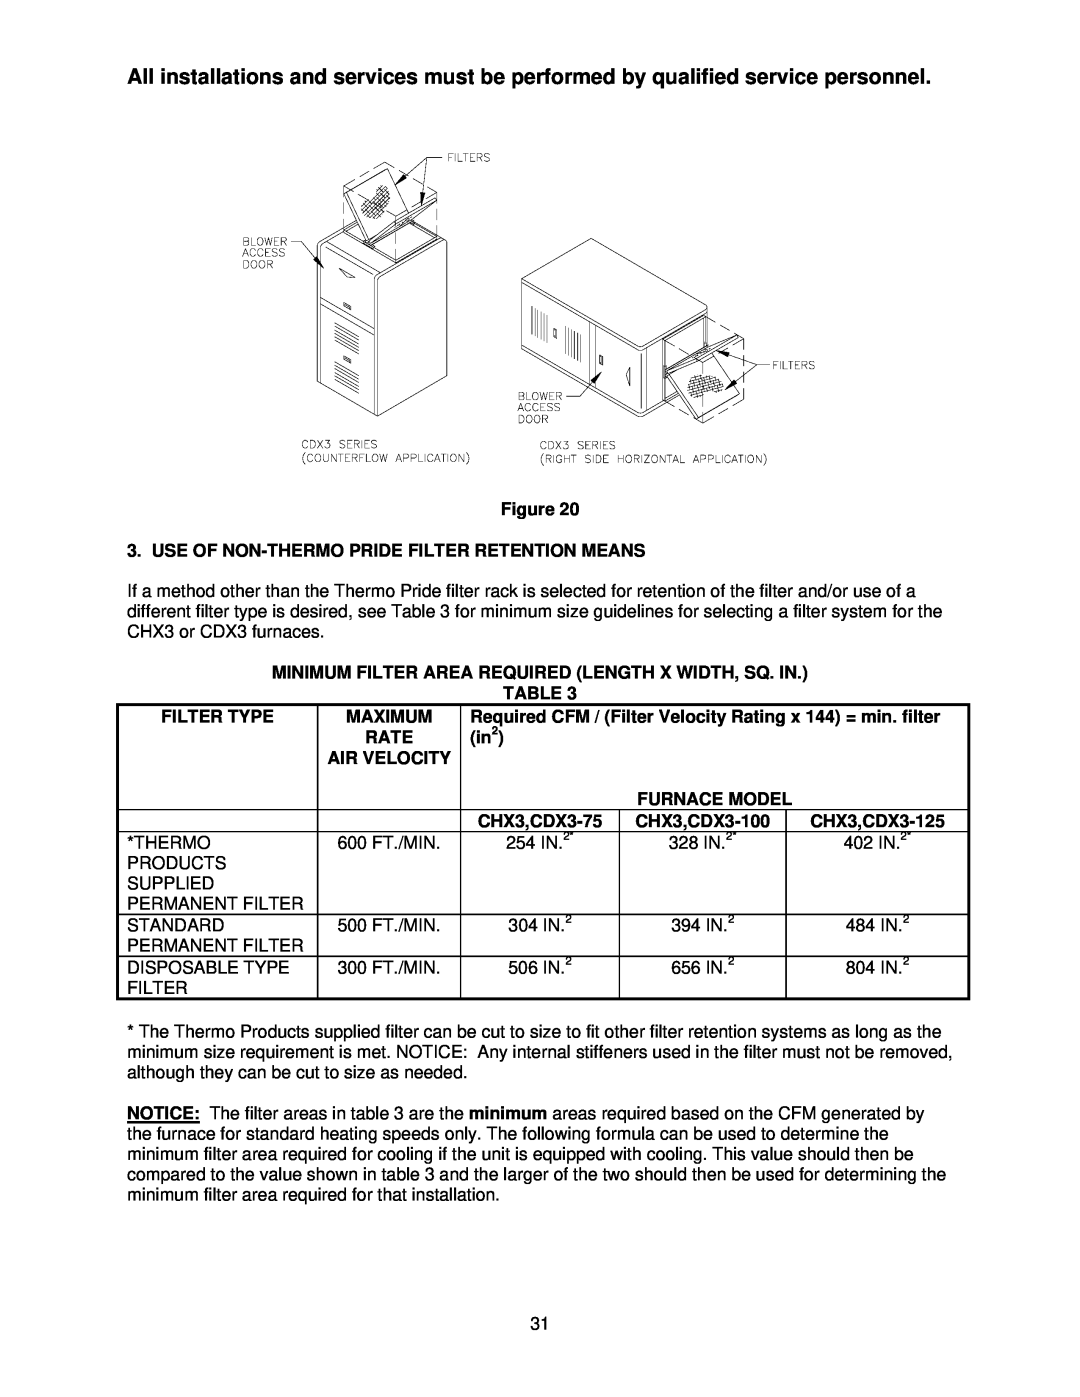 Thermo Products 100n, chx-3 75n, 125n operation manual Figure 